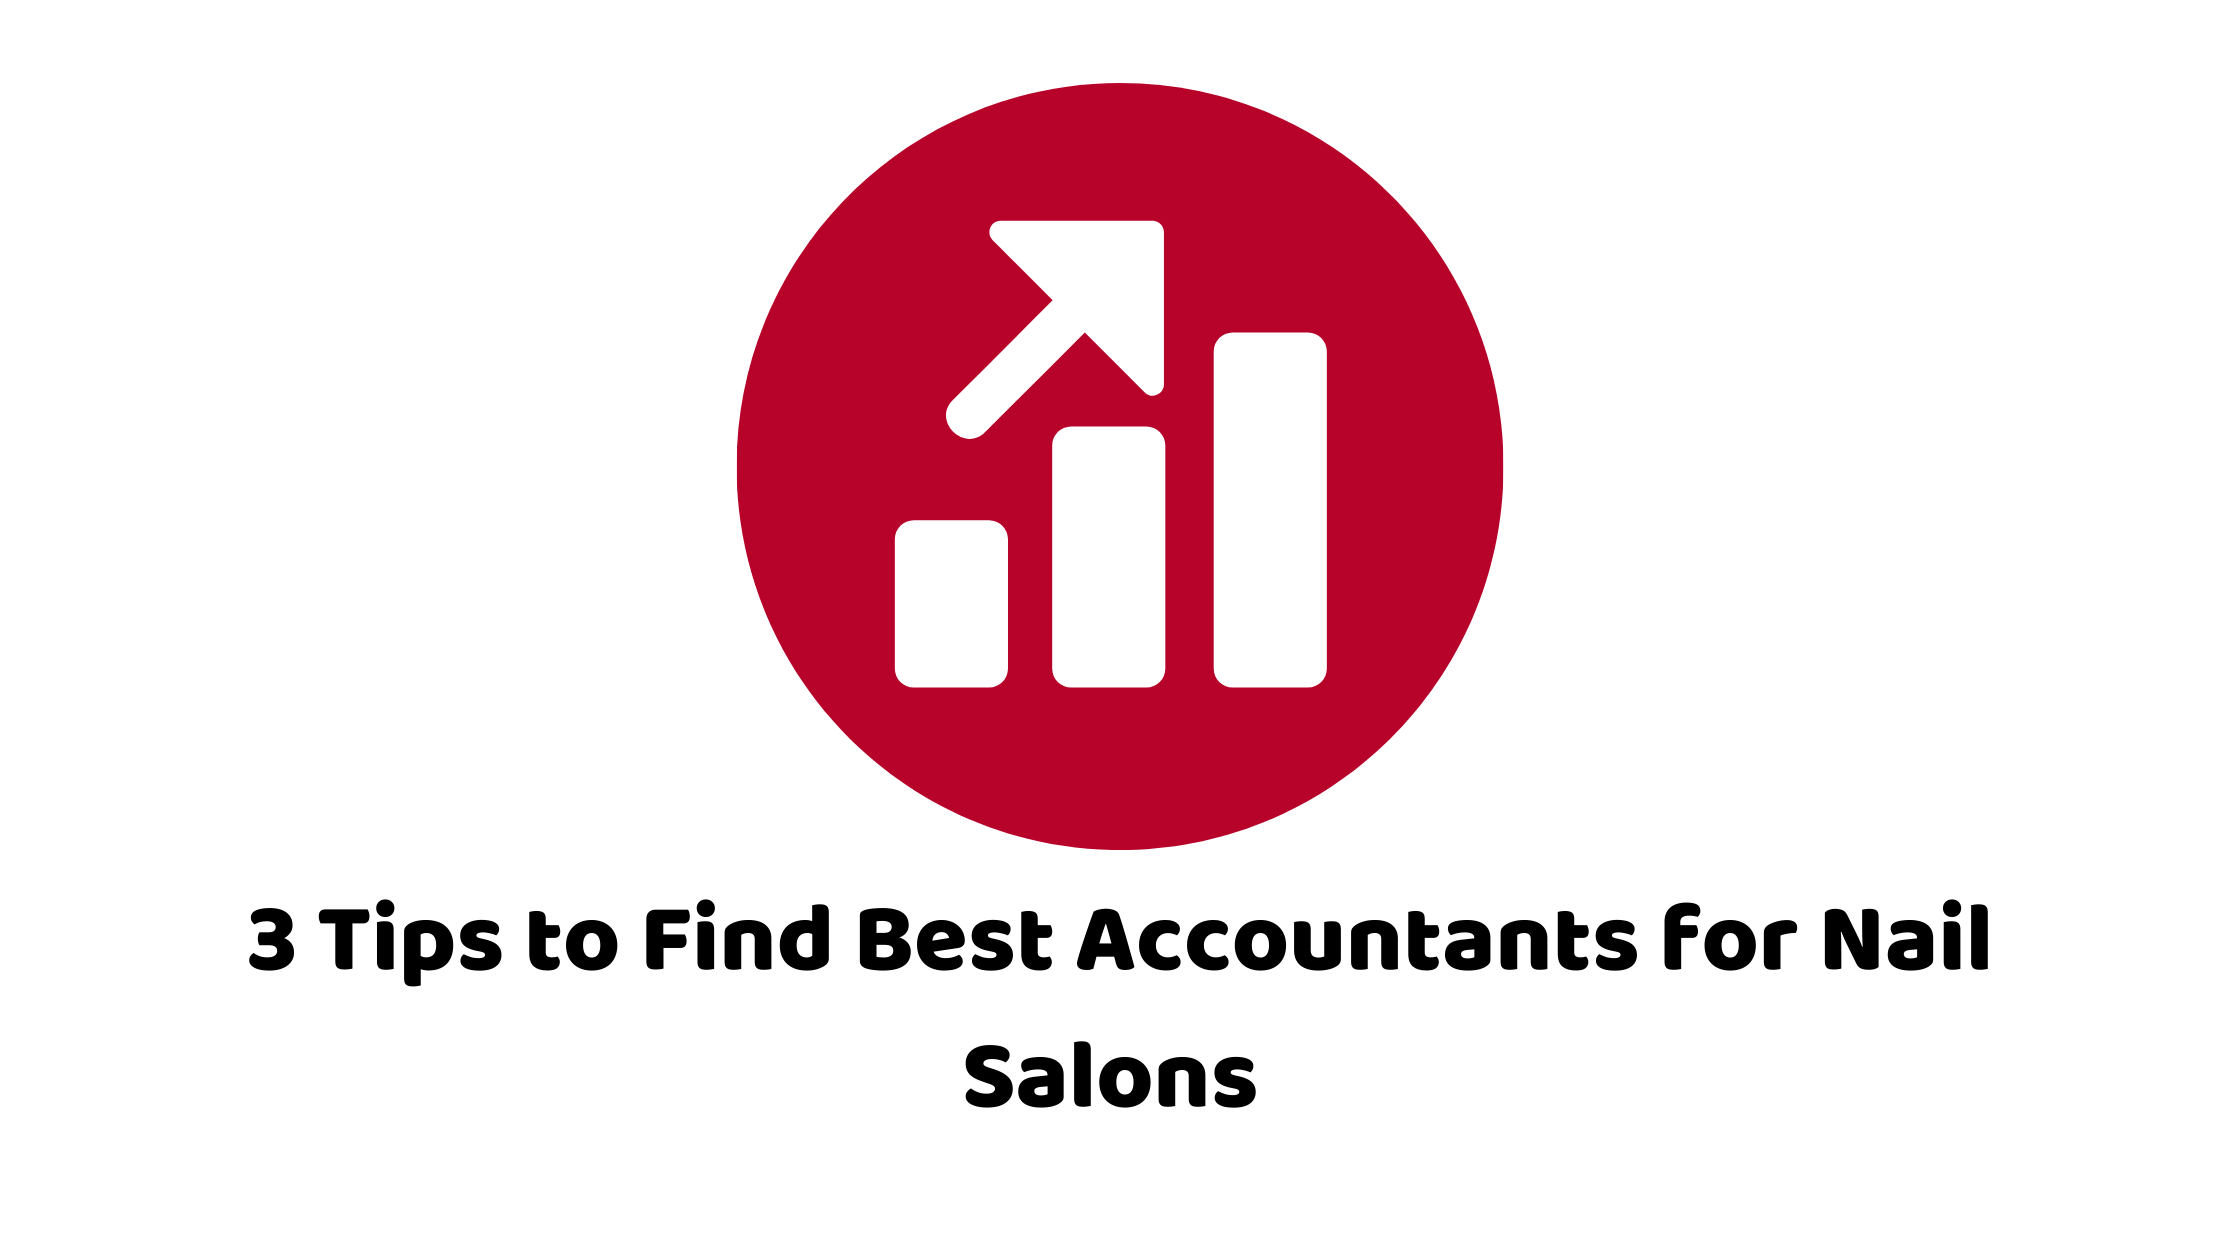 Best Accountants for Nail Salons